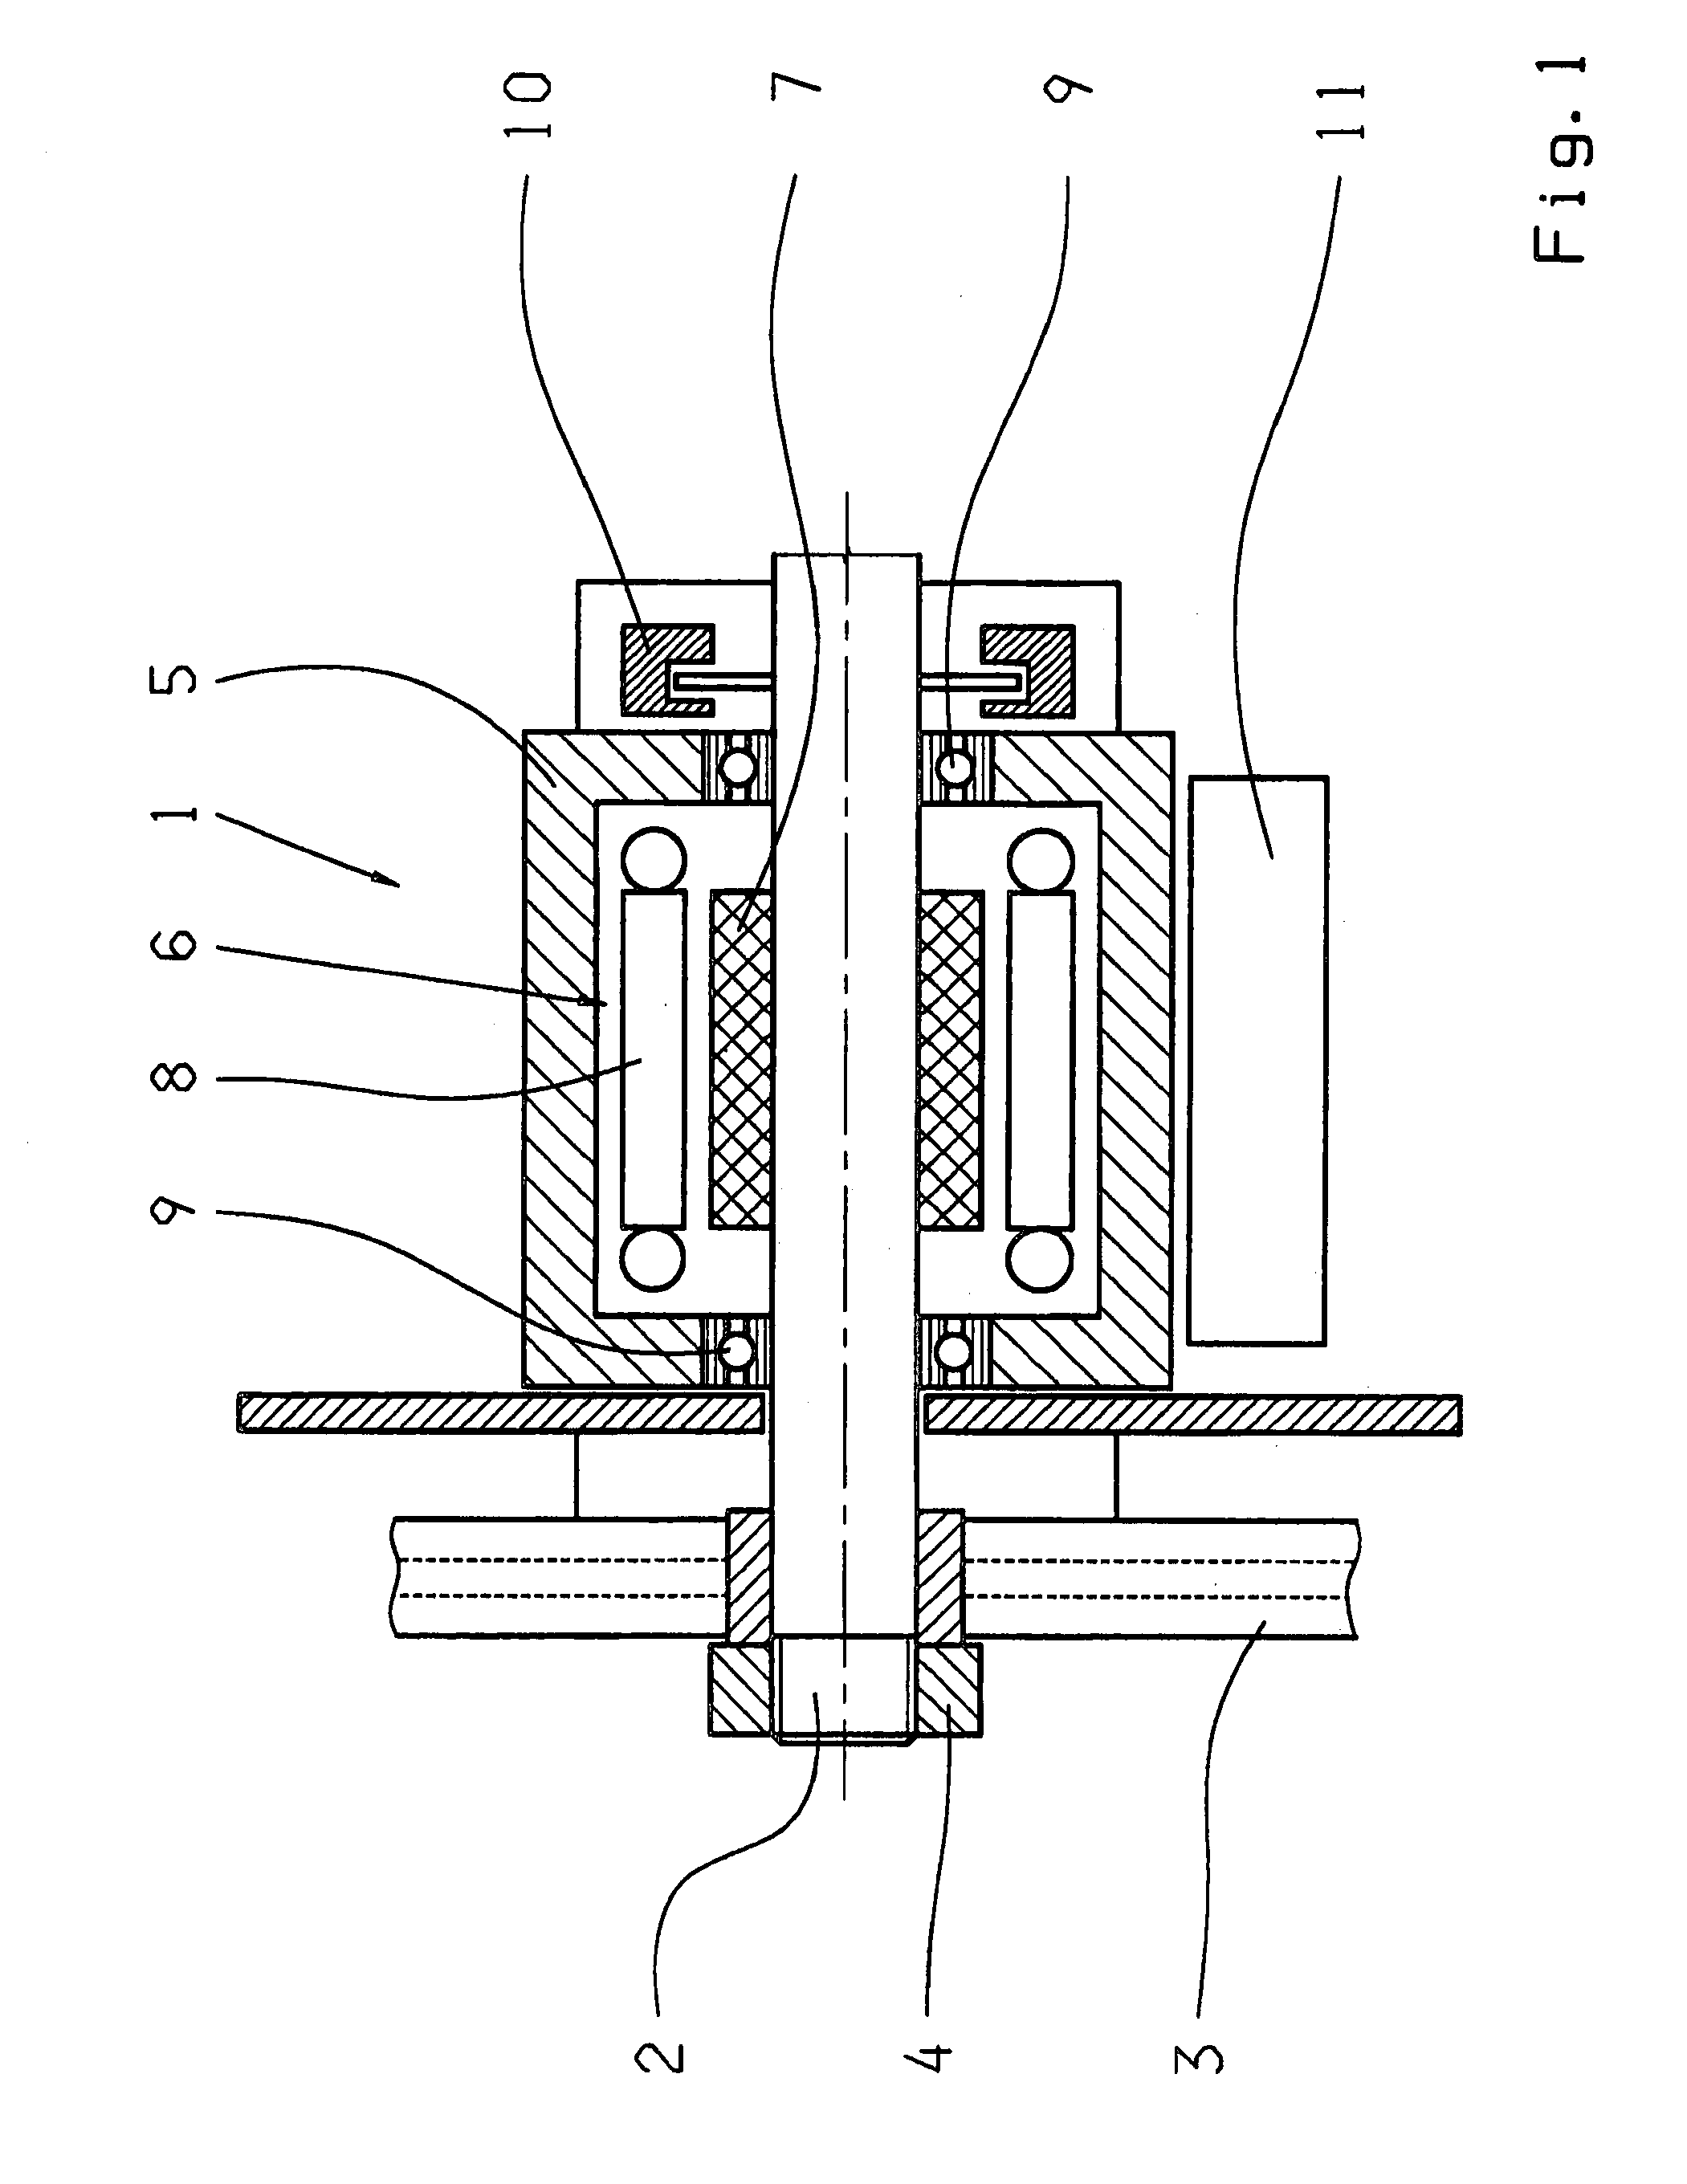 Steering unit for a steer-by-wire ship's control system and method for operating the steering unit